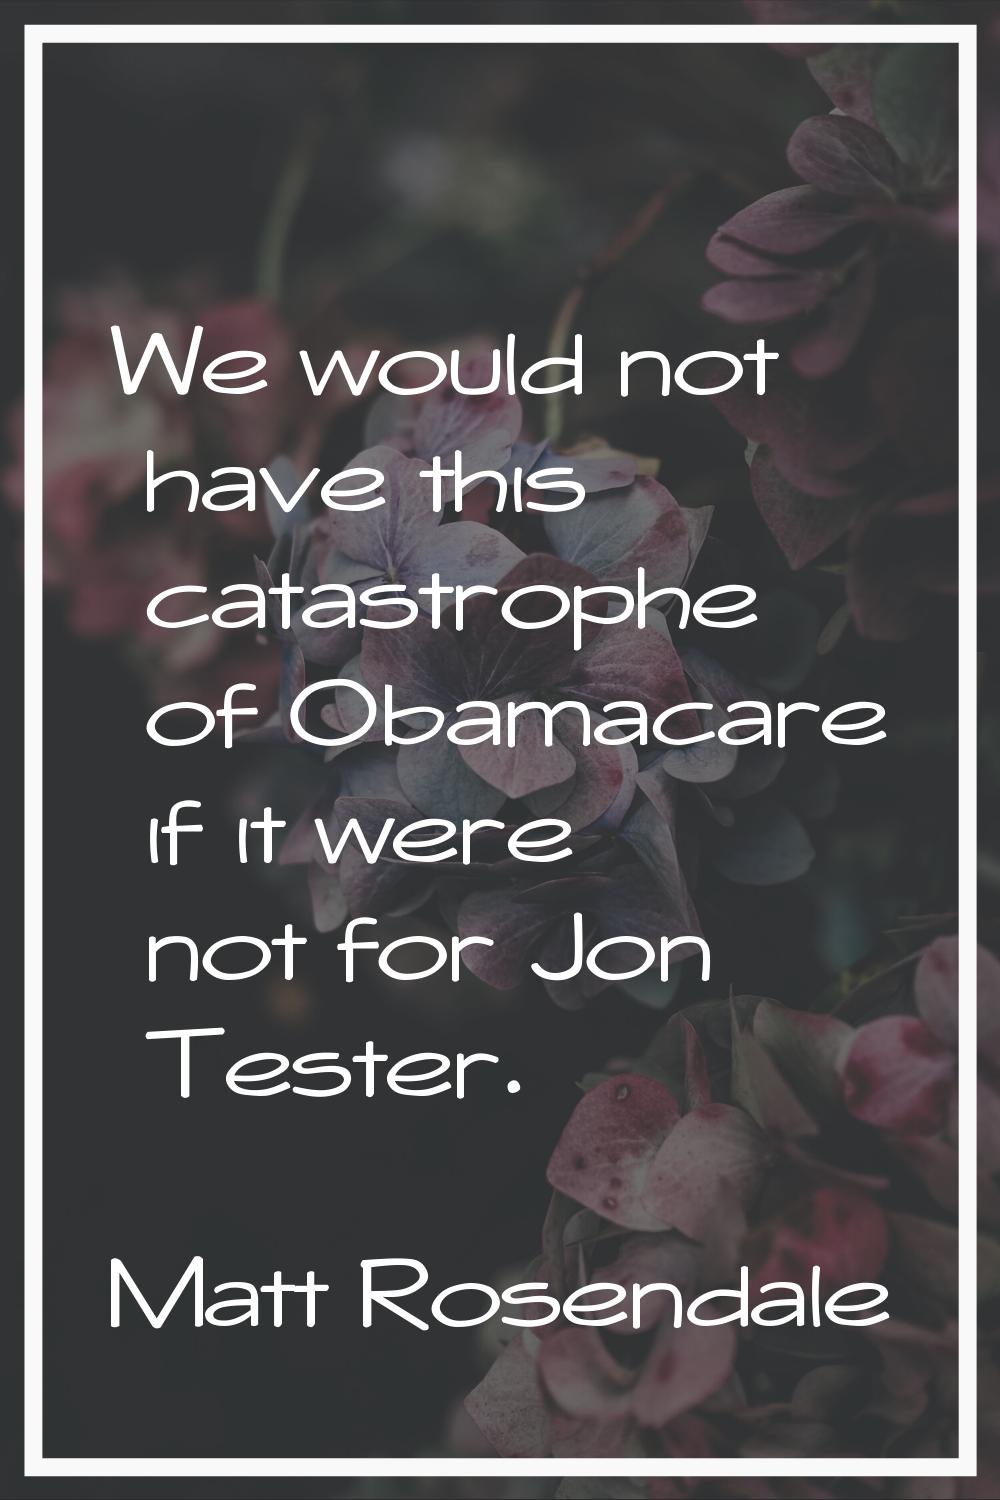 We would not have this catastrophe of Obamacare if it were not for Jon Tester.